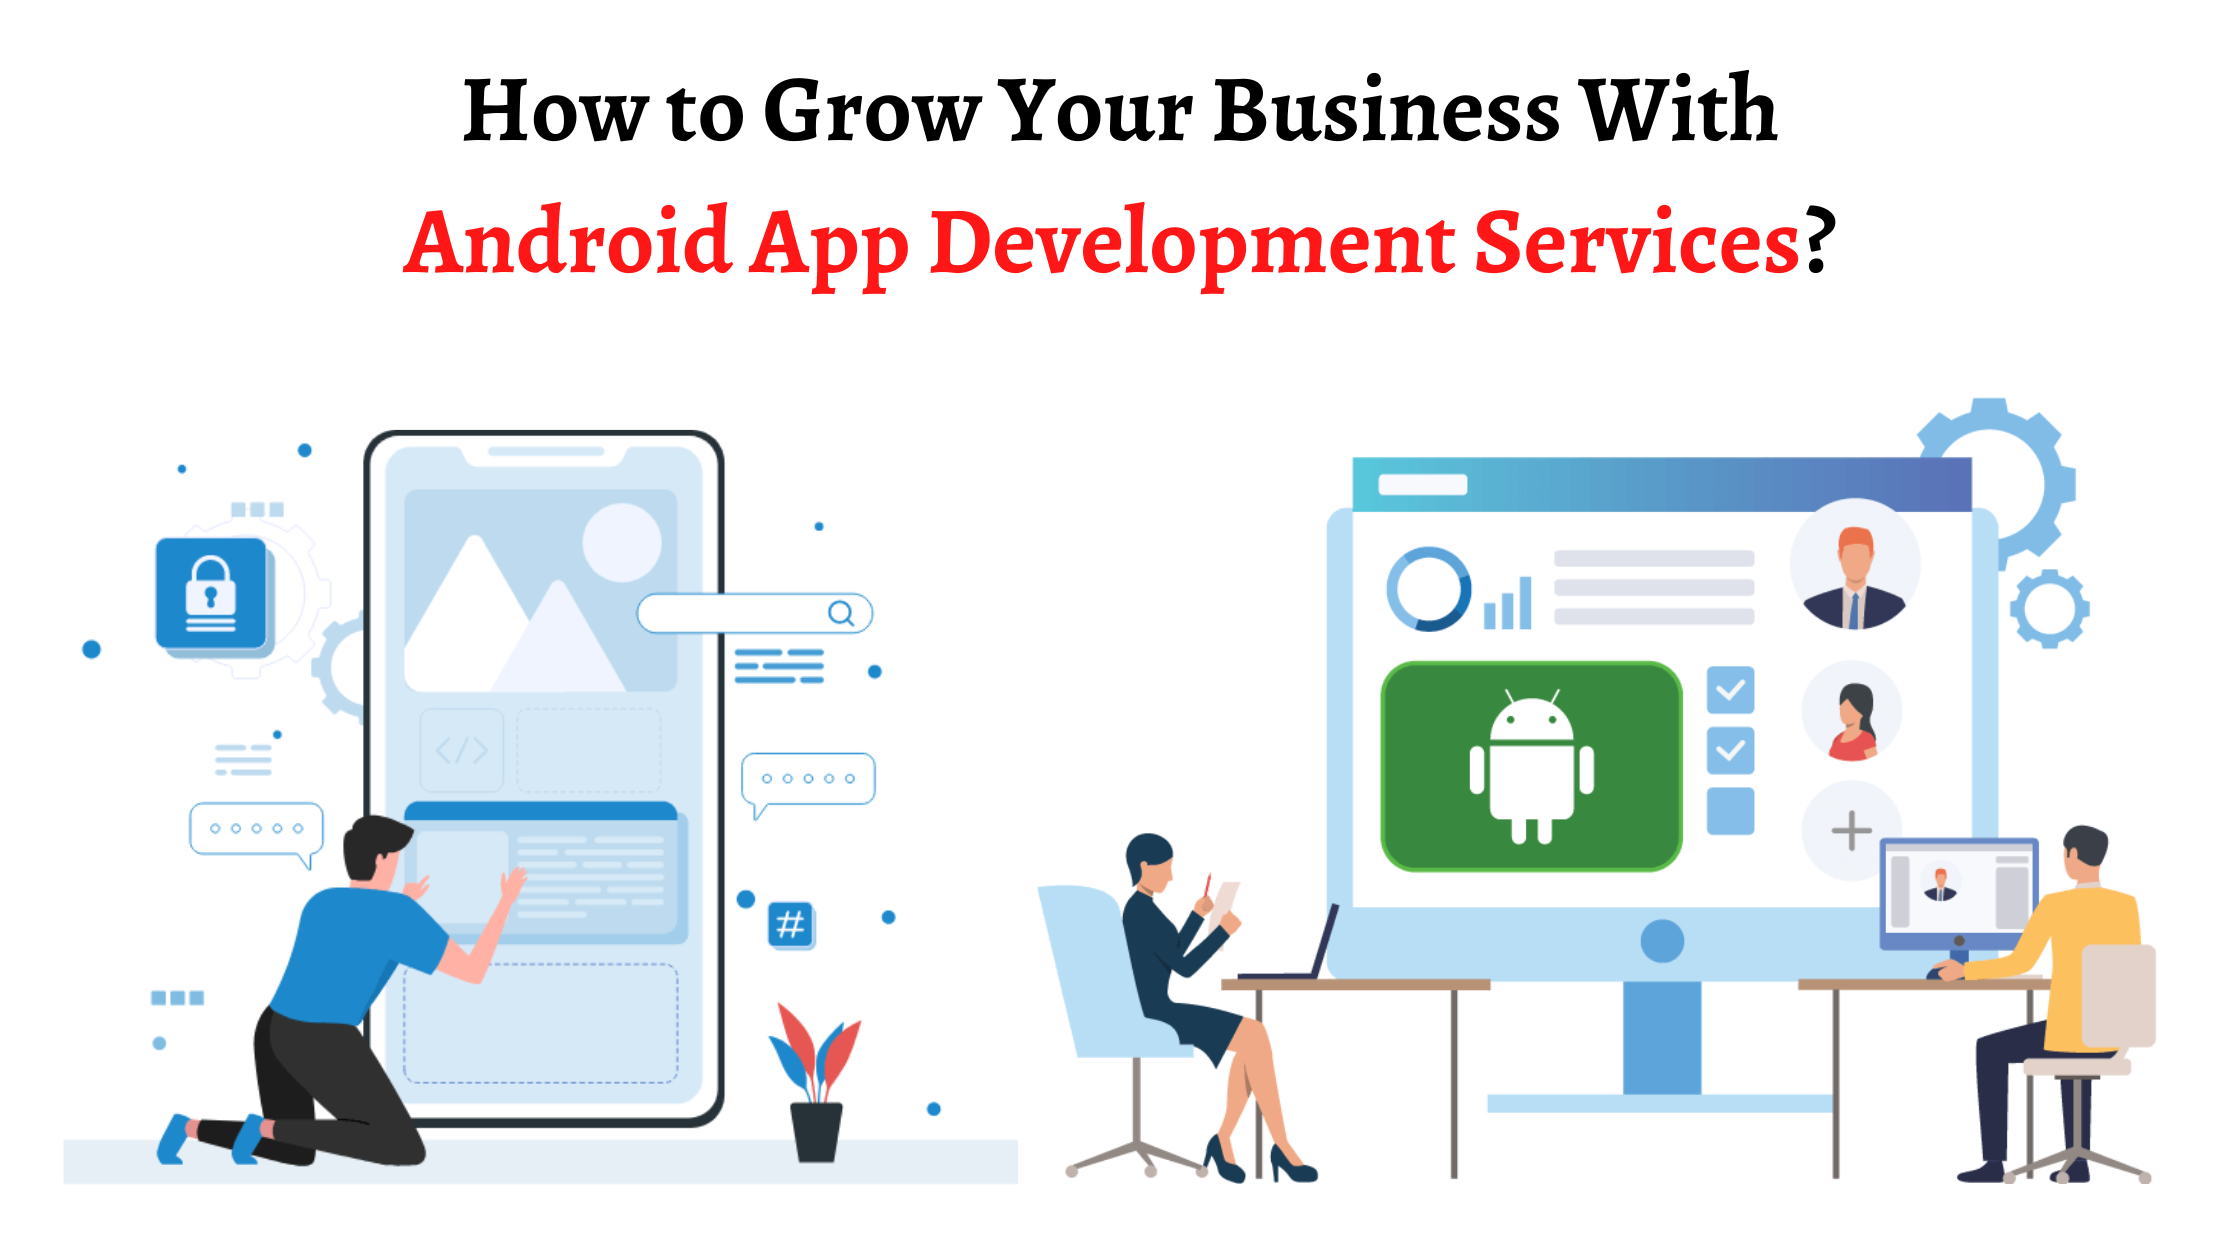 How to Grow Your Business With Android App Development Services-3e98a6e0